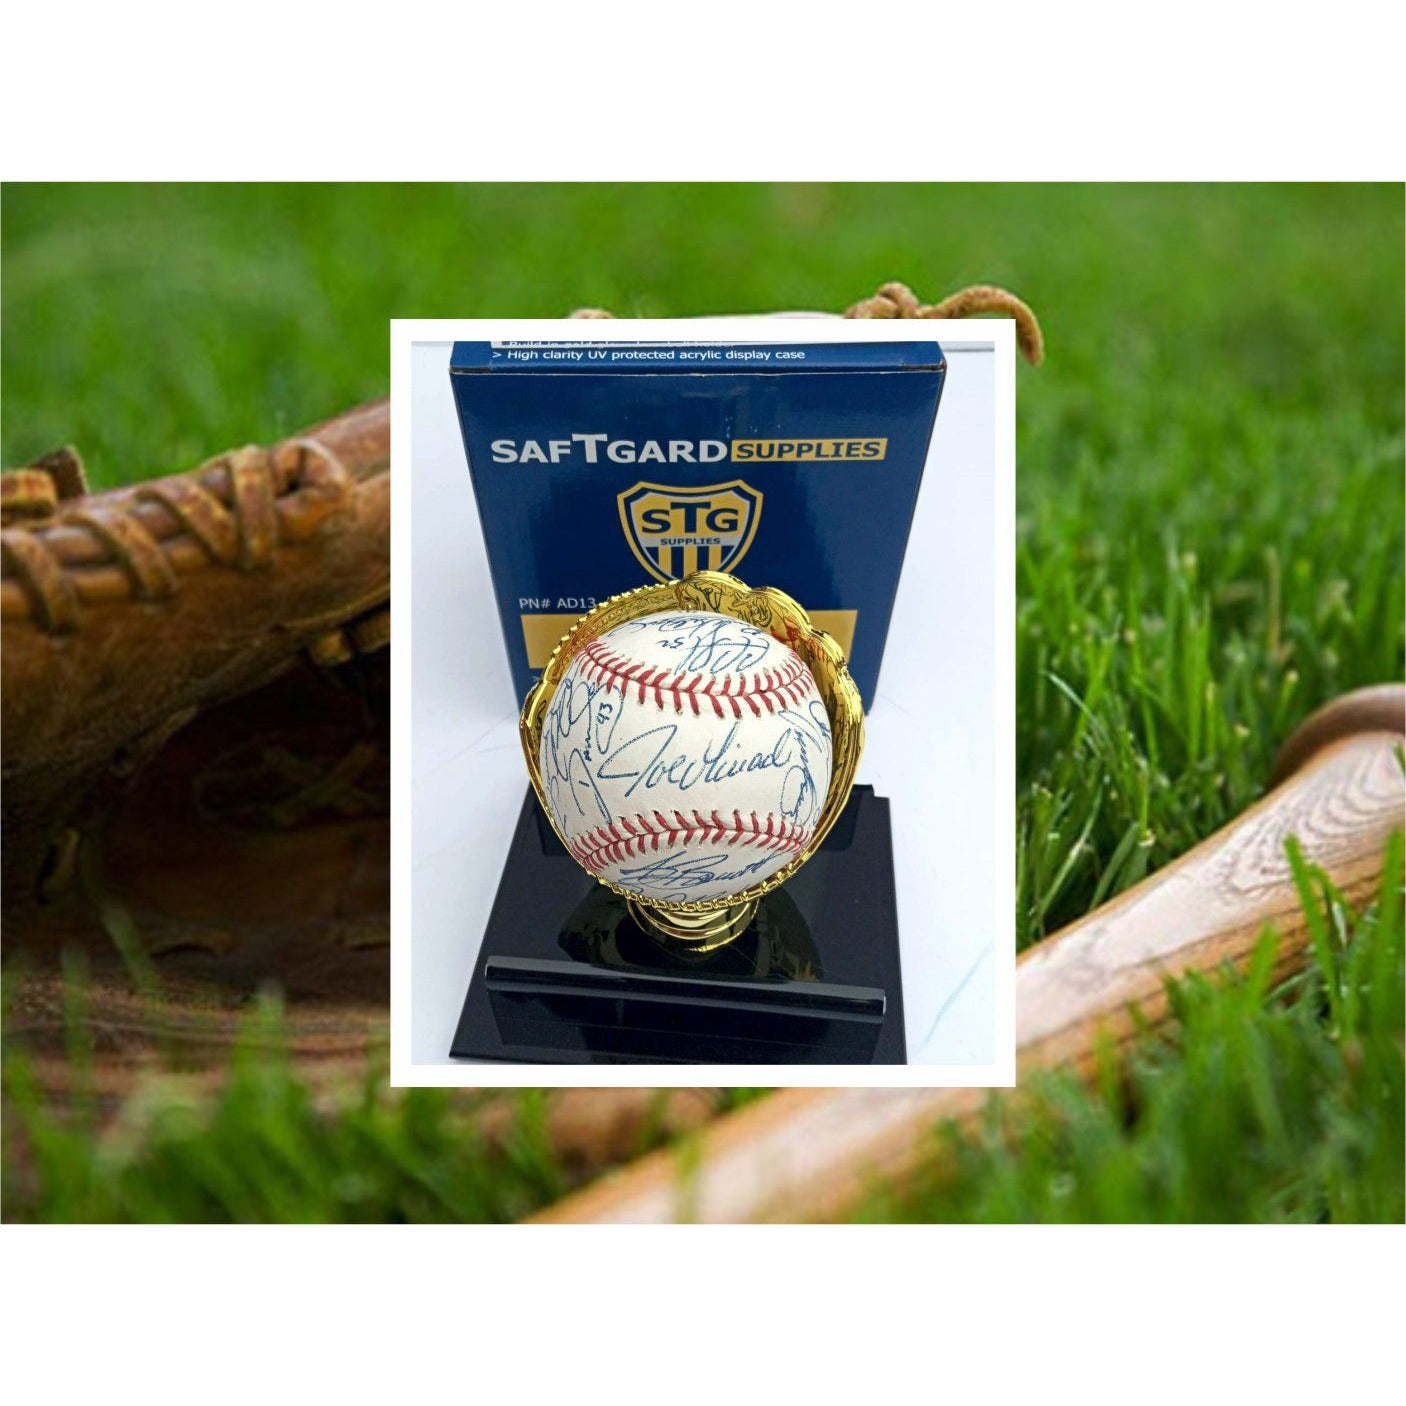 Derek Jeter Mariano Rivera New York Yankees 2009 World Series champs team sign Rawlings MLB baseball signed with proof with free case